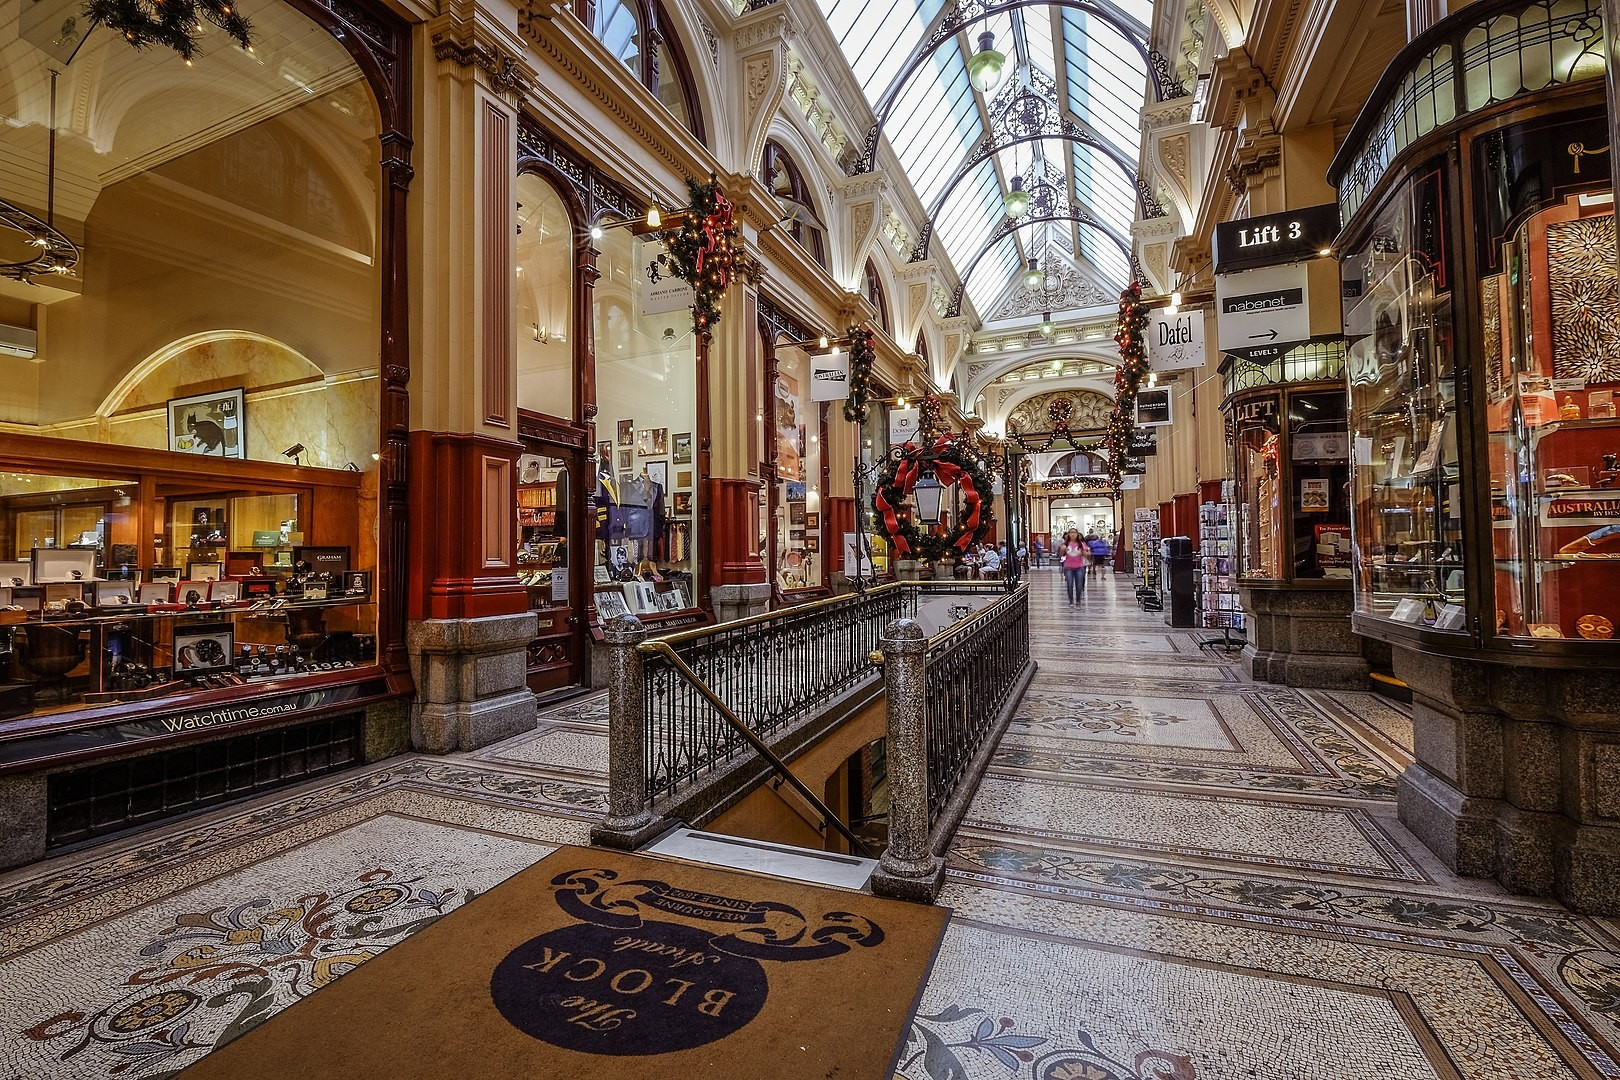 By a.canvas.of.light from Melbourne, Australia - Block Arcade, CC BY 2.0, https://commons.wikimedia.org/w/index.php?curid=78024262